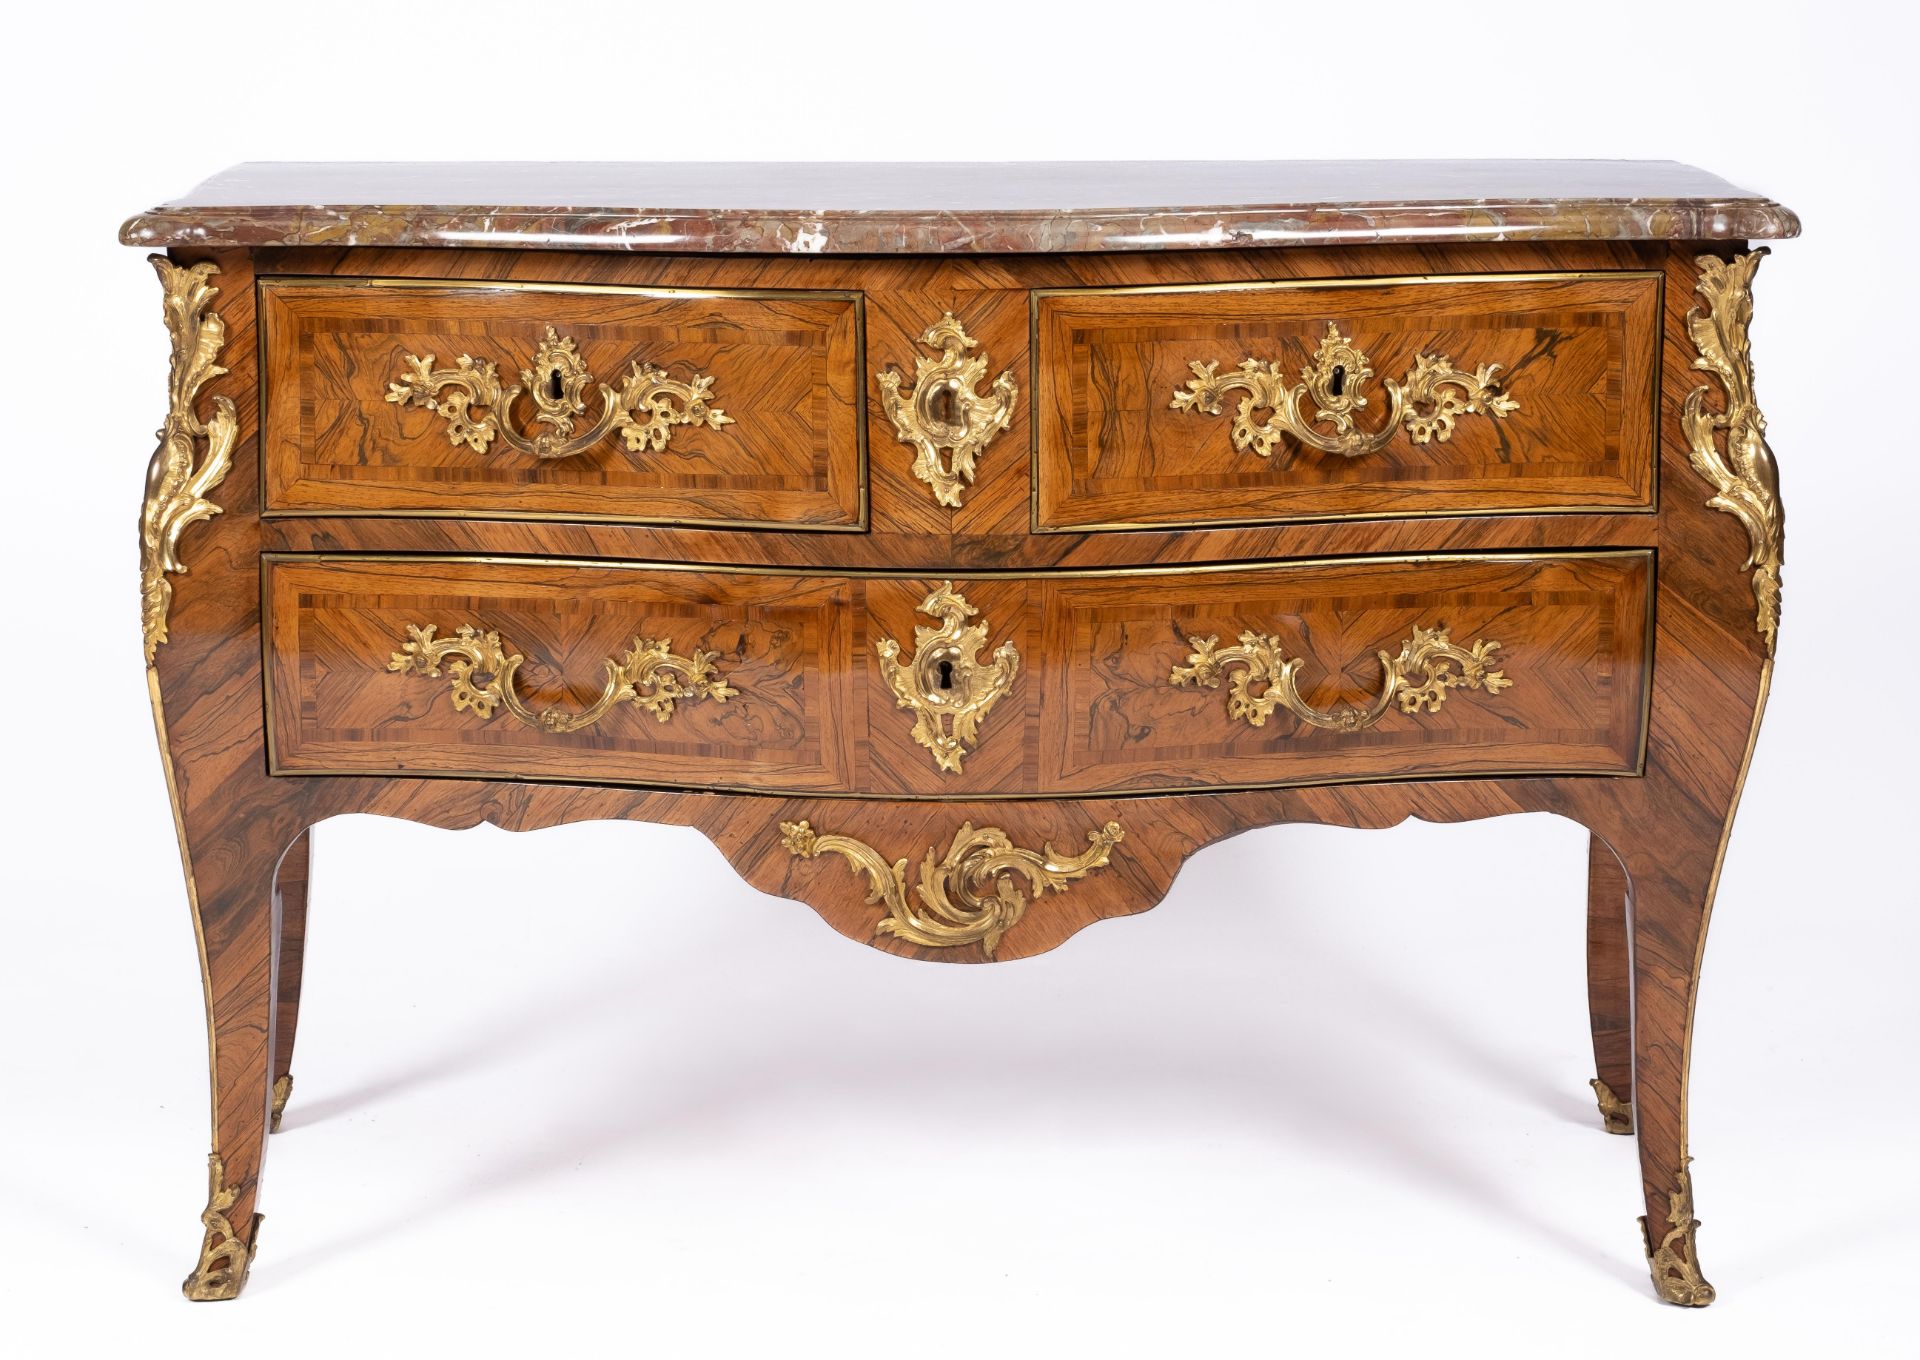 A Louis XV ormolu-mounted kingwood and fruitwood marquetry commode - Image 2 of 6